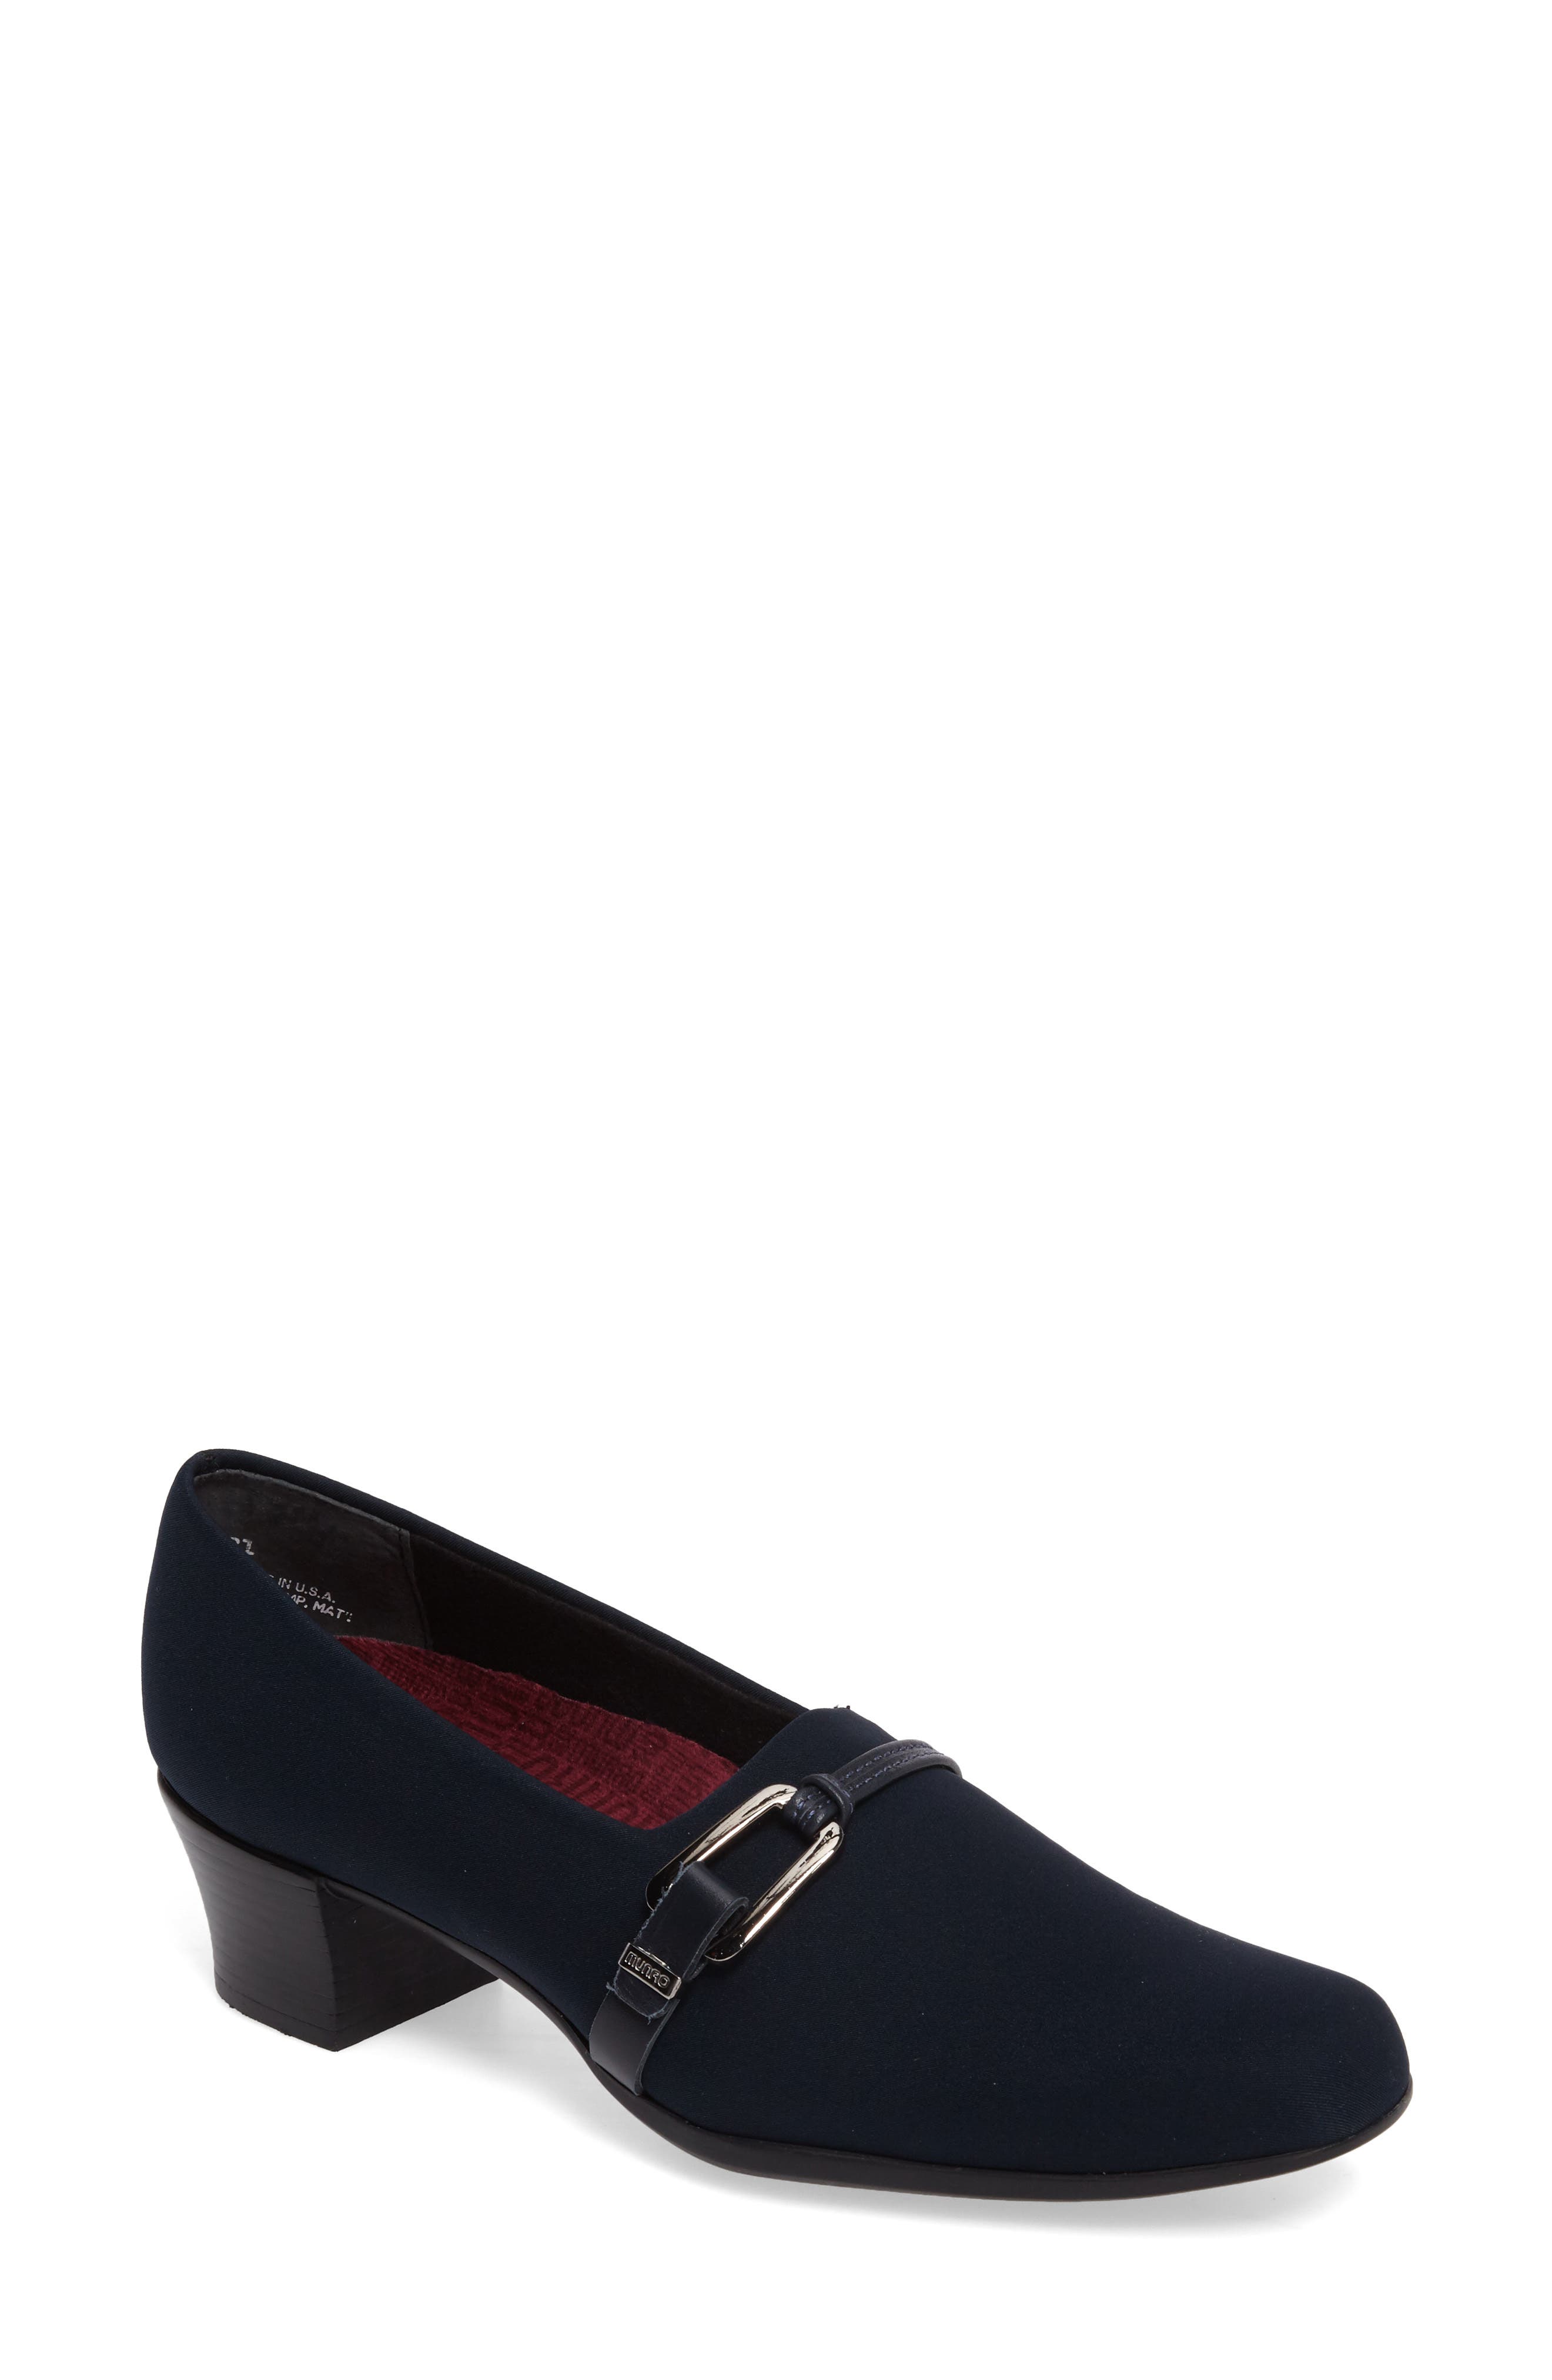 nordstrom munro shoes sale